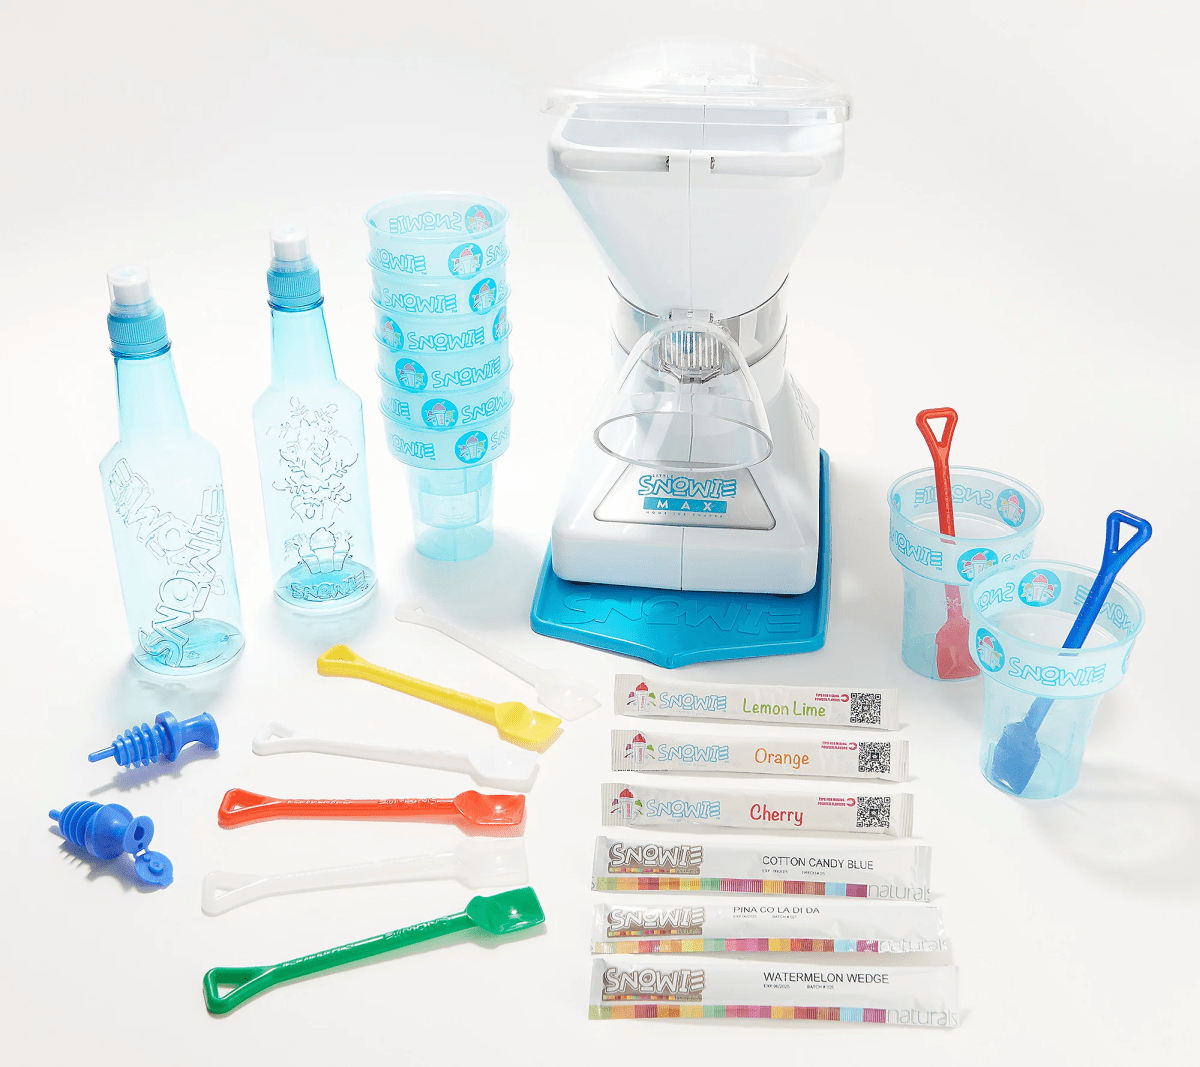 The Little Snowie Ice Machine from QVC displayed alongside its accessories